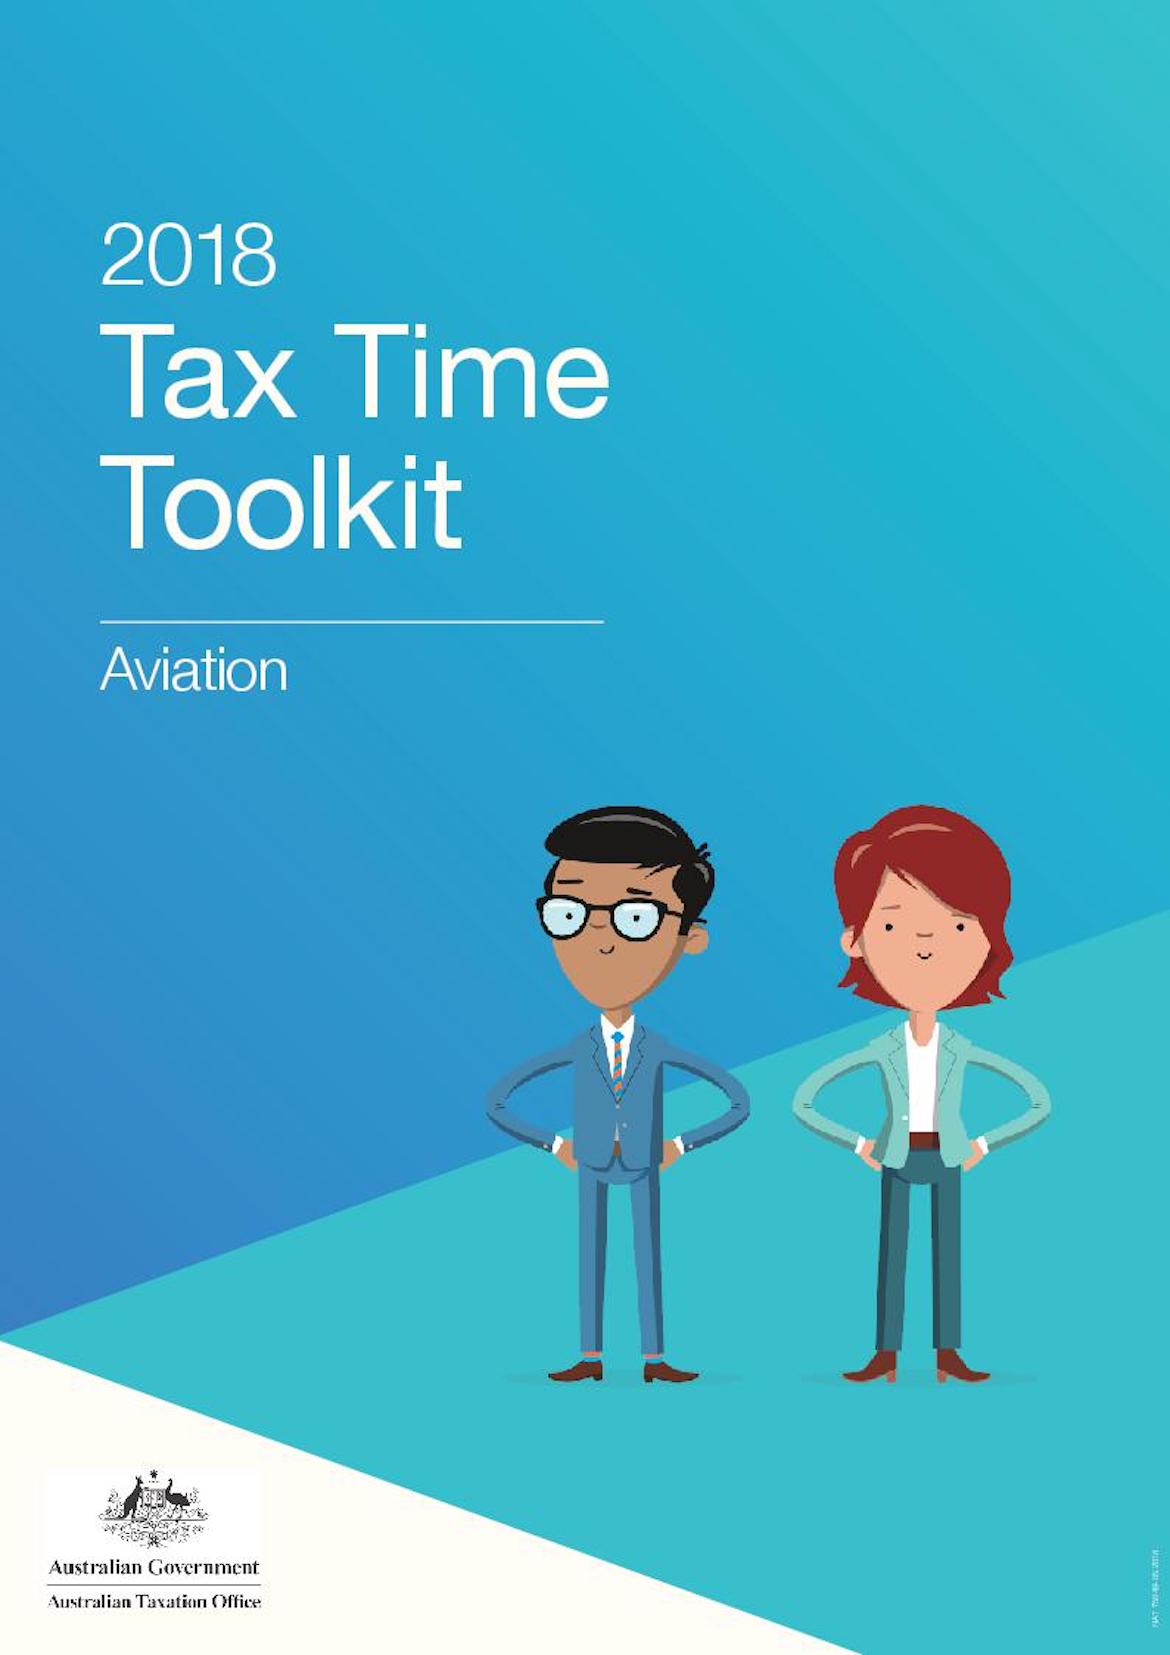 The cover page of the ATO's aviation tax time toolkit. (ATO)